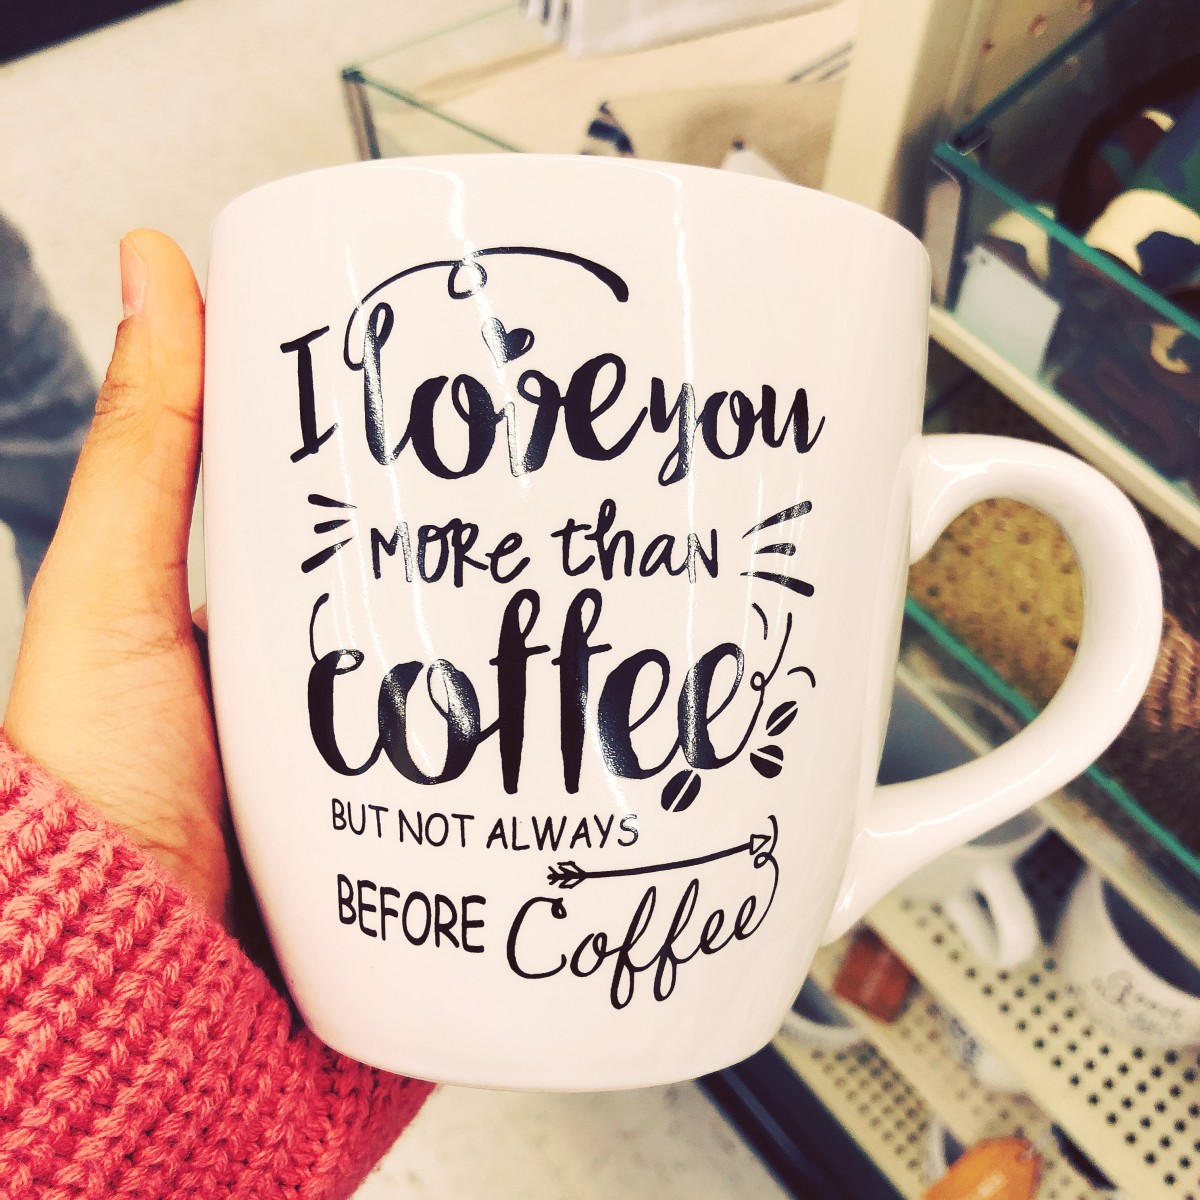 Buy a coffee mug with the word "coffee" for yourself, your partner, or your coffee buddy.